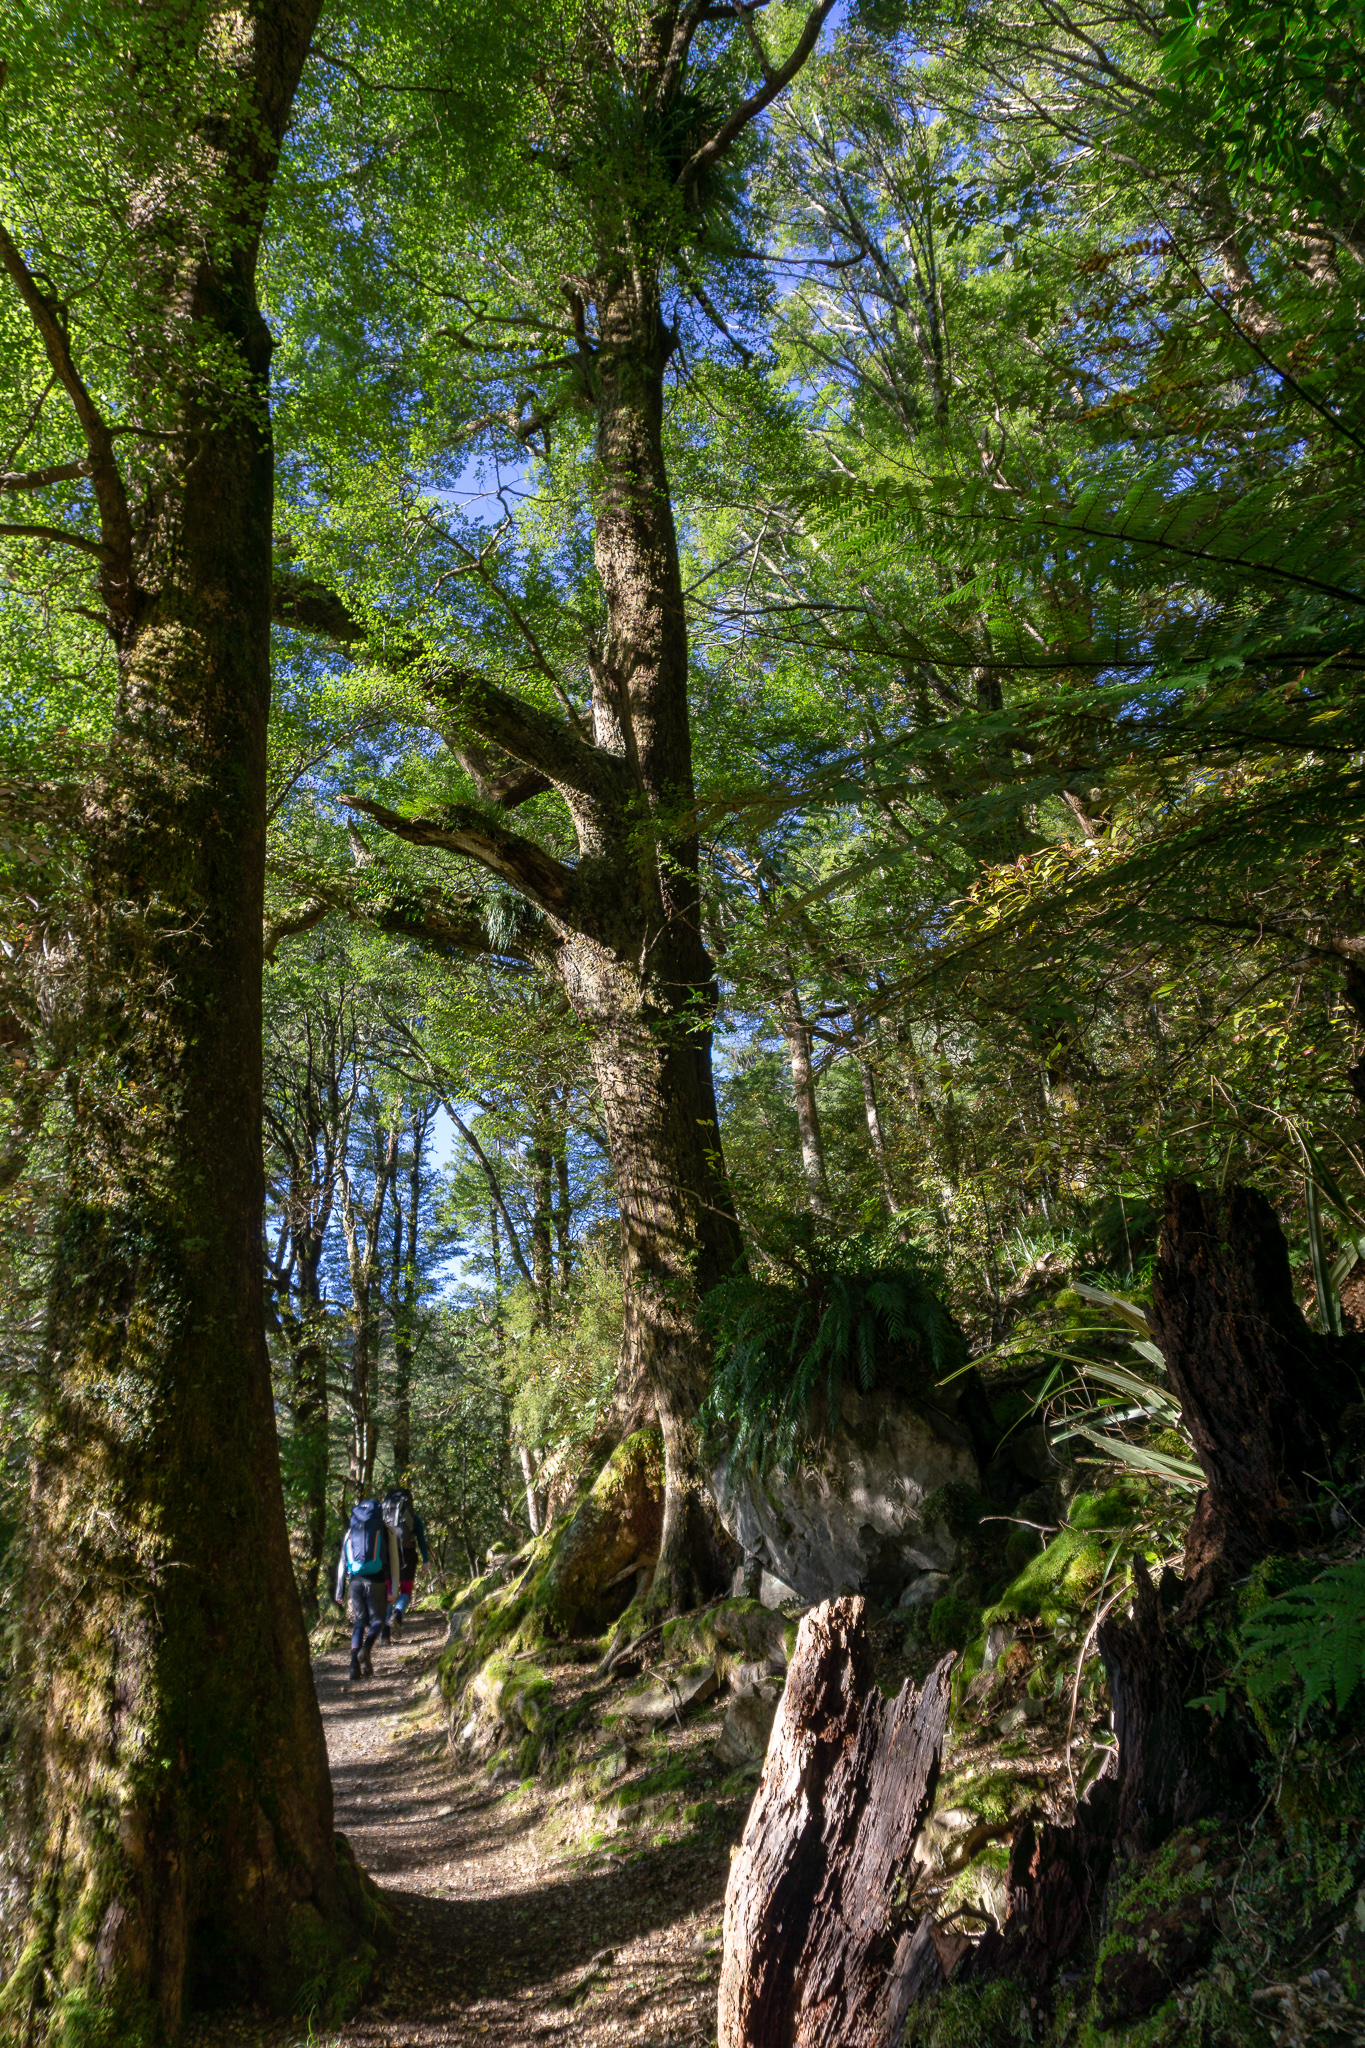 Two trampers walking along in dappled light along Rangiwahia track surrounded by forest